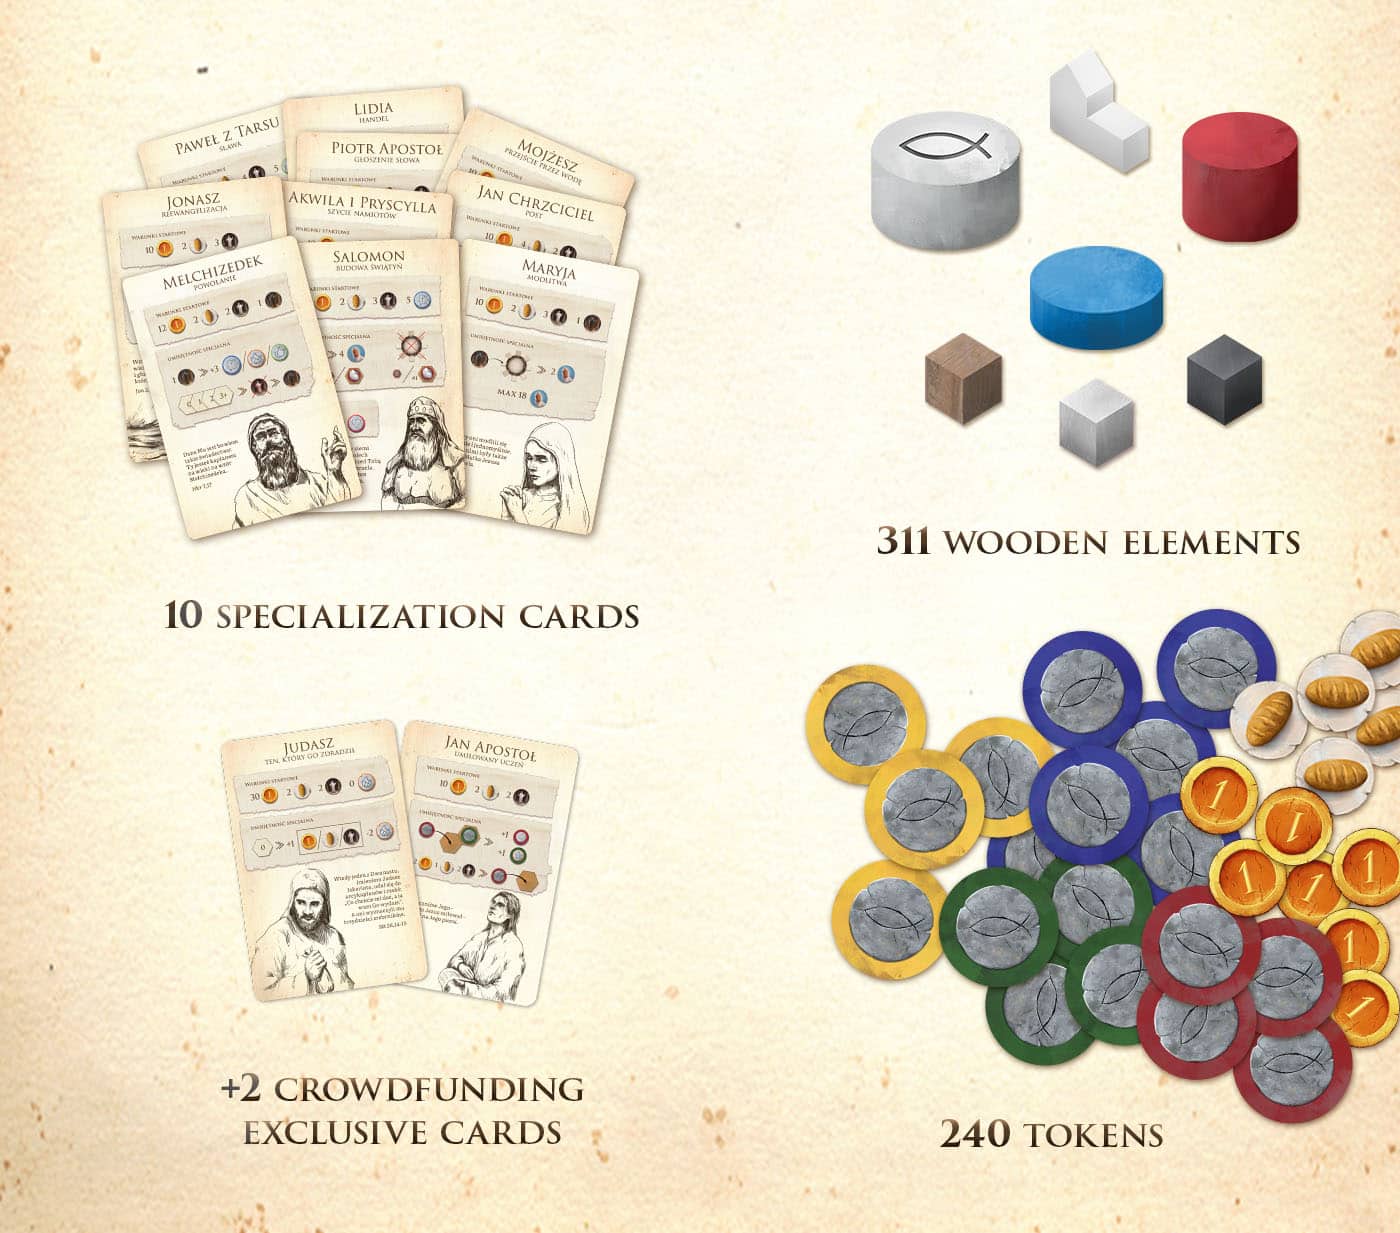 Box contents of Lux Evangelii board game by Jakub Cichecki